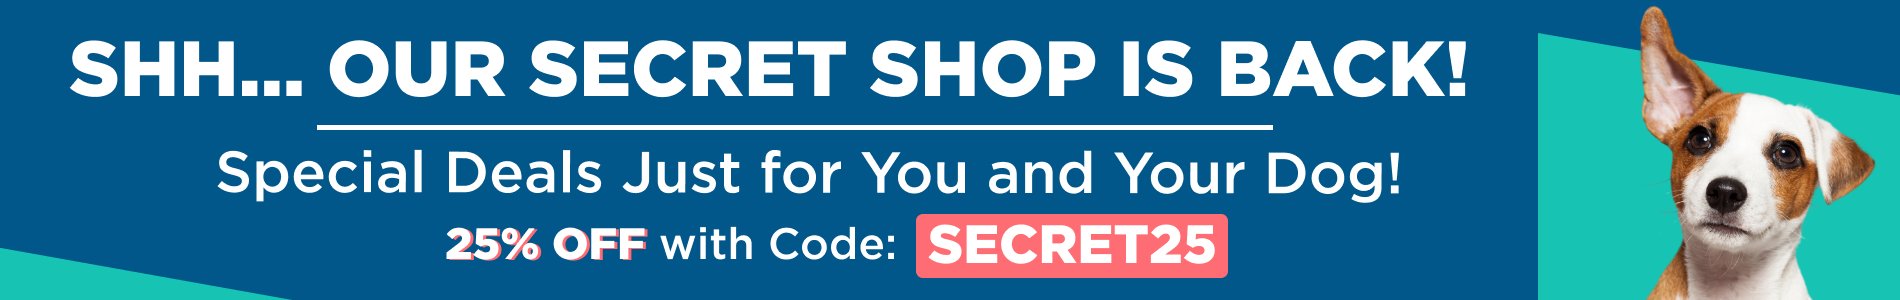 25% Off Secret Shop for Members Only